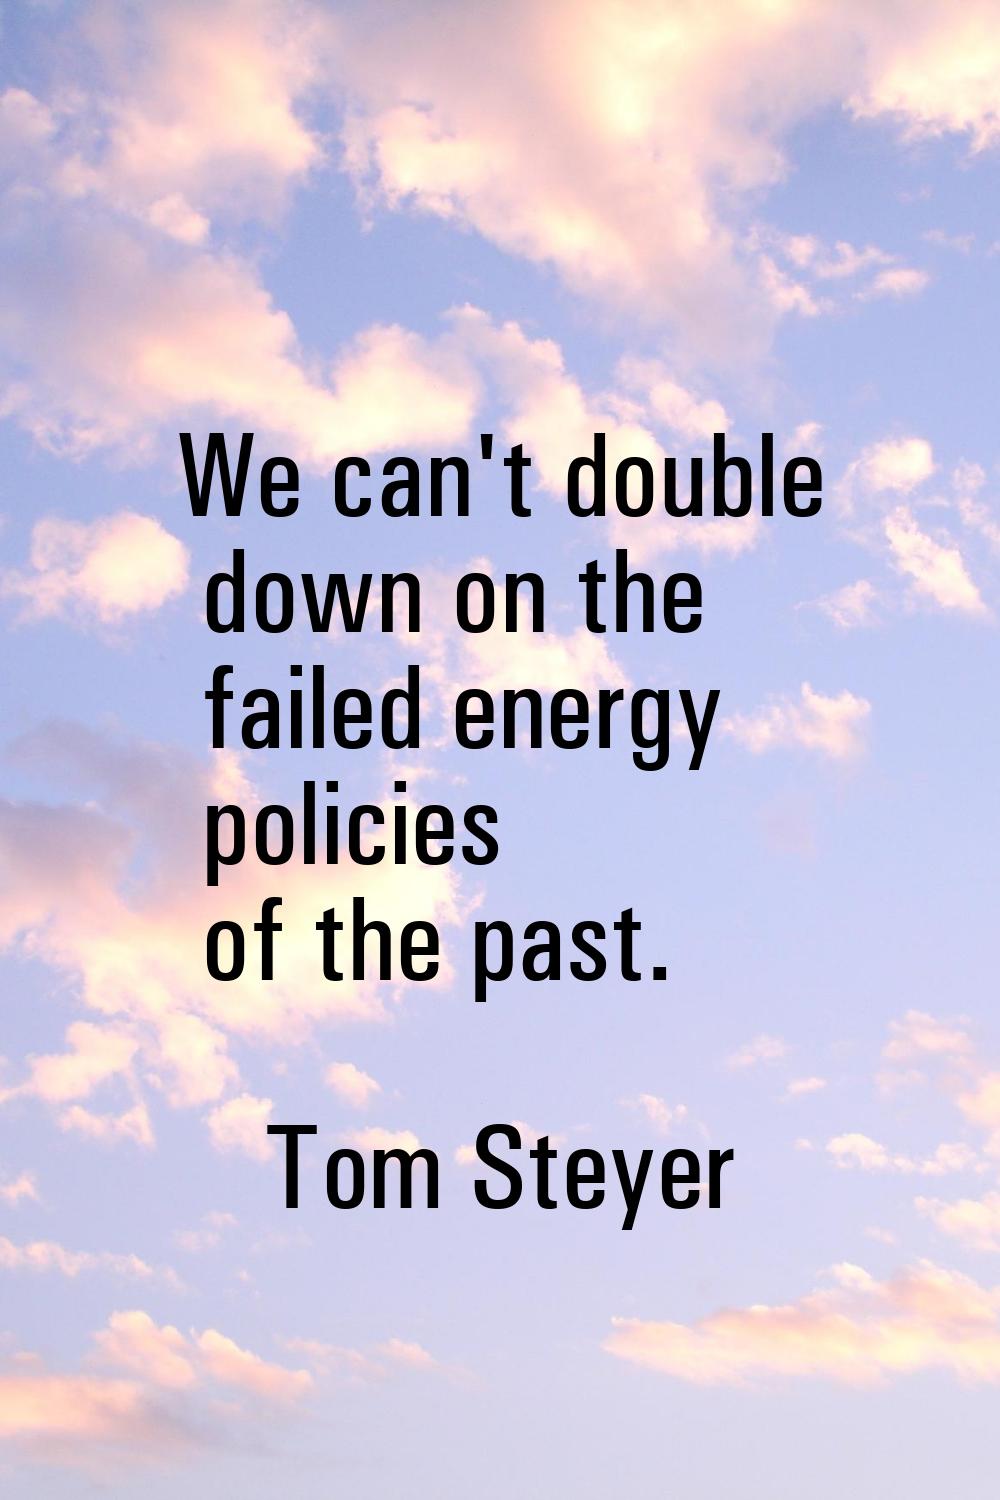 We can't double down on the failed energy policies of the past.